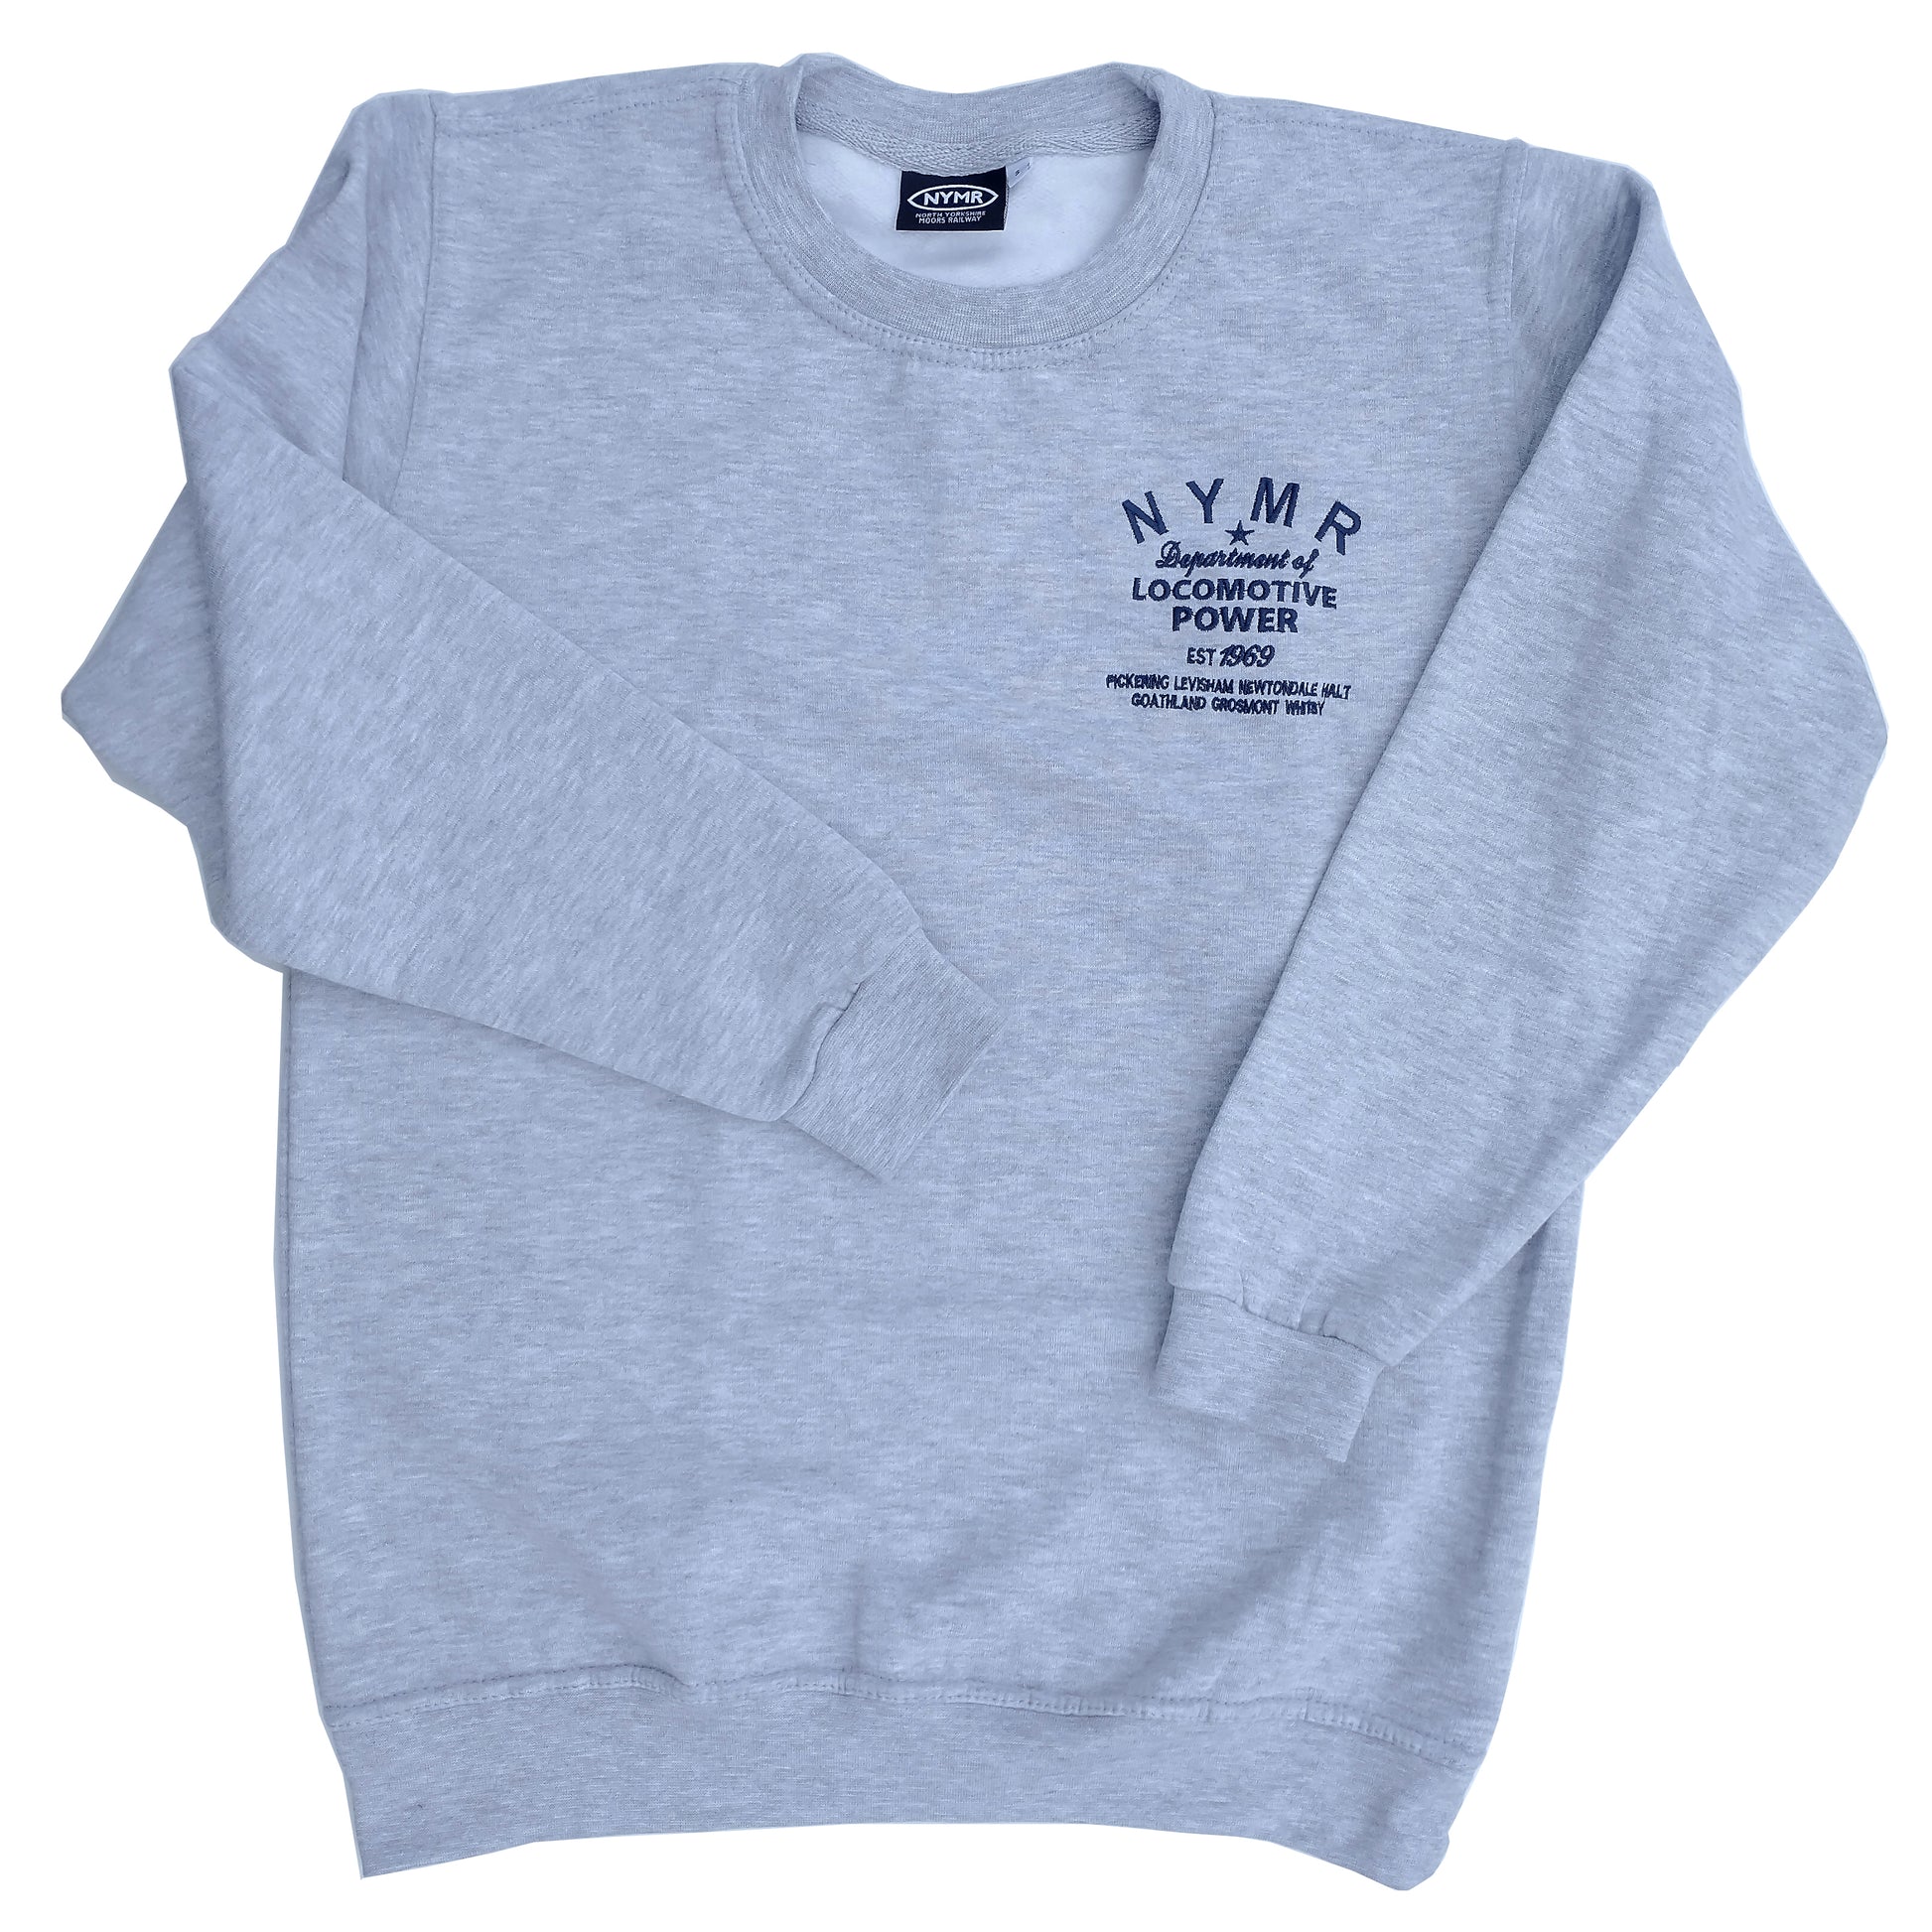 Grey sweatshirt with round neck and loco power logo embroidered on left breast.